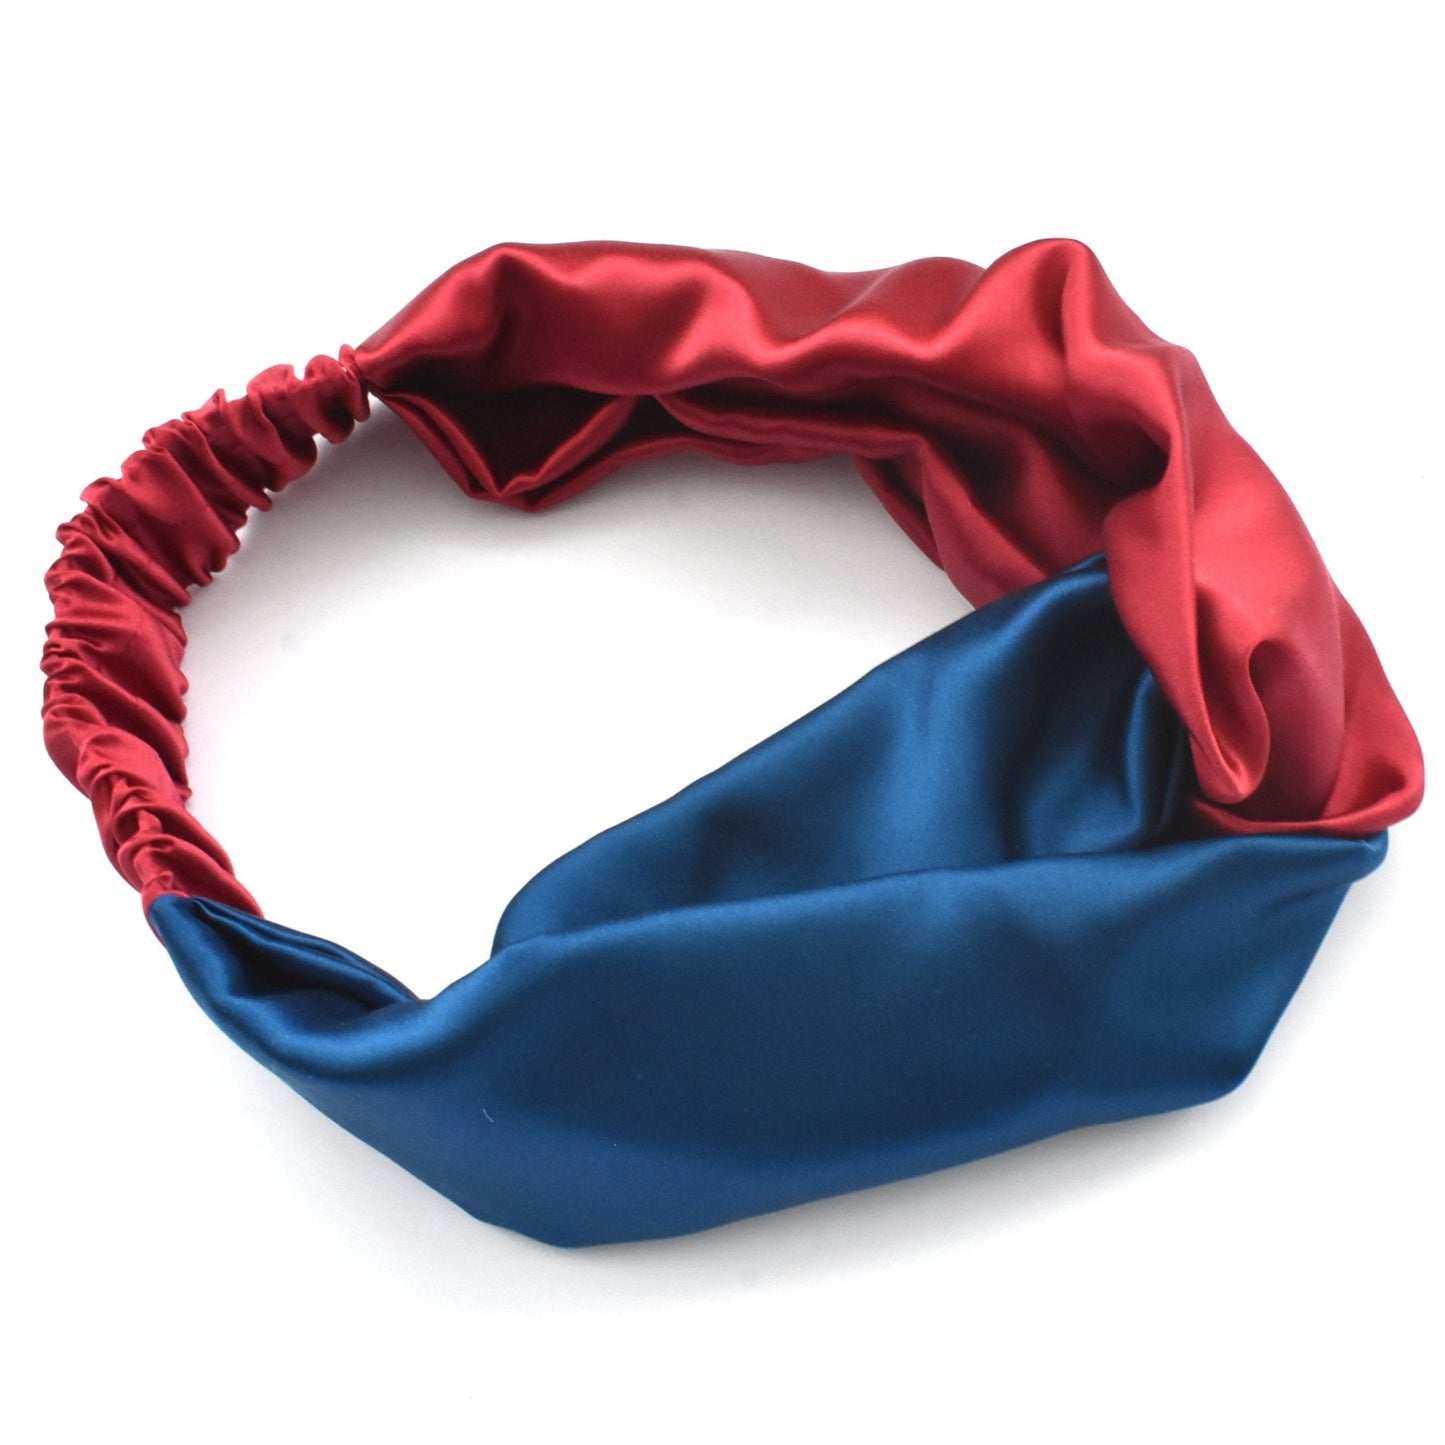 Blue & Red Split Twisted Turban hairband and neck scarf in Mulberry Silk - 100% pure silk satin